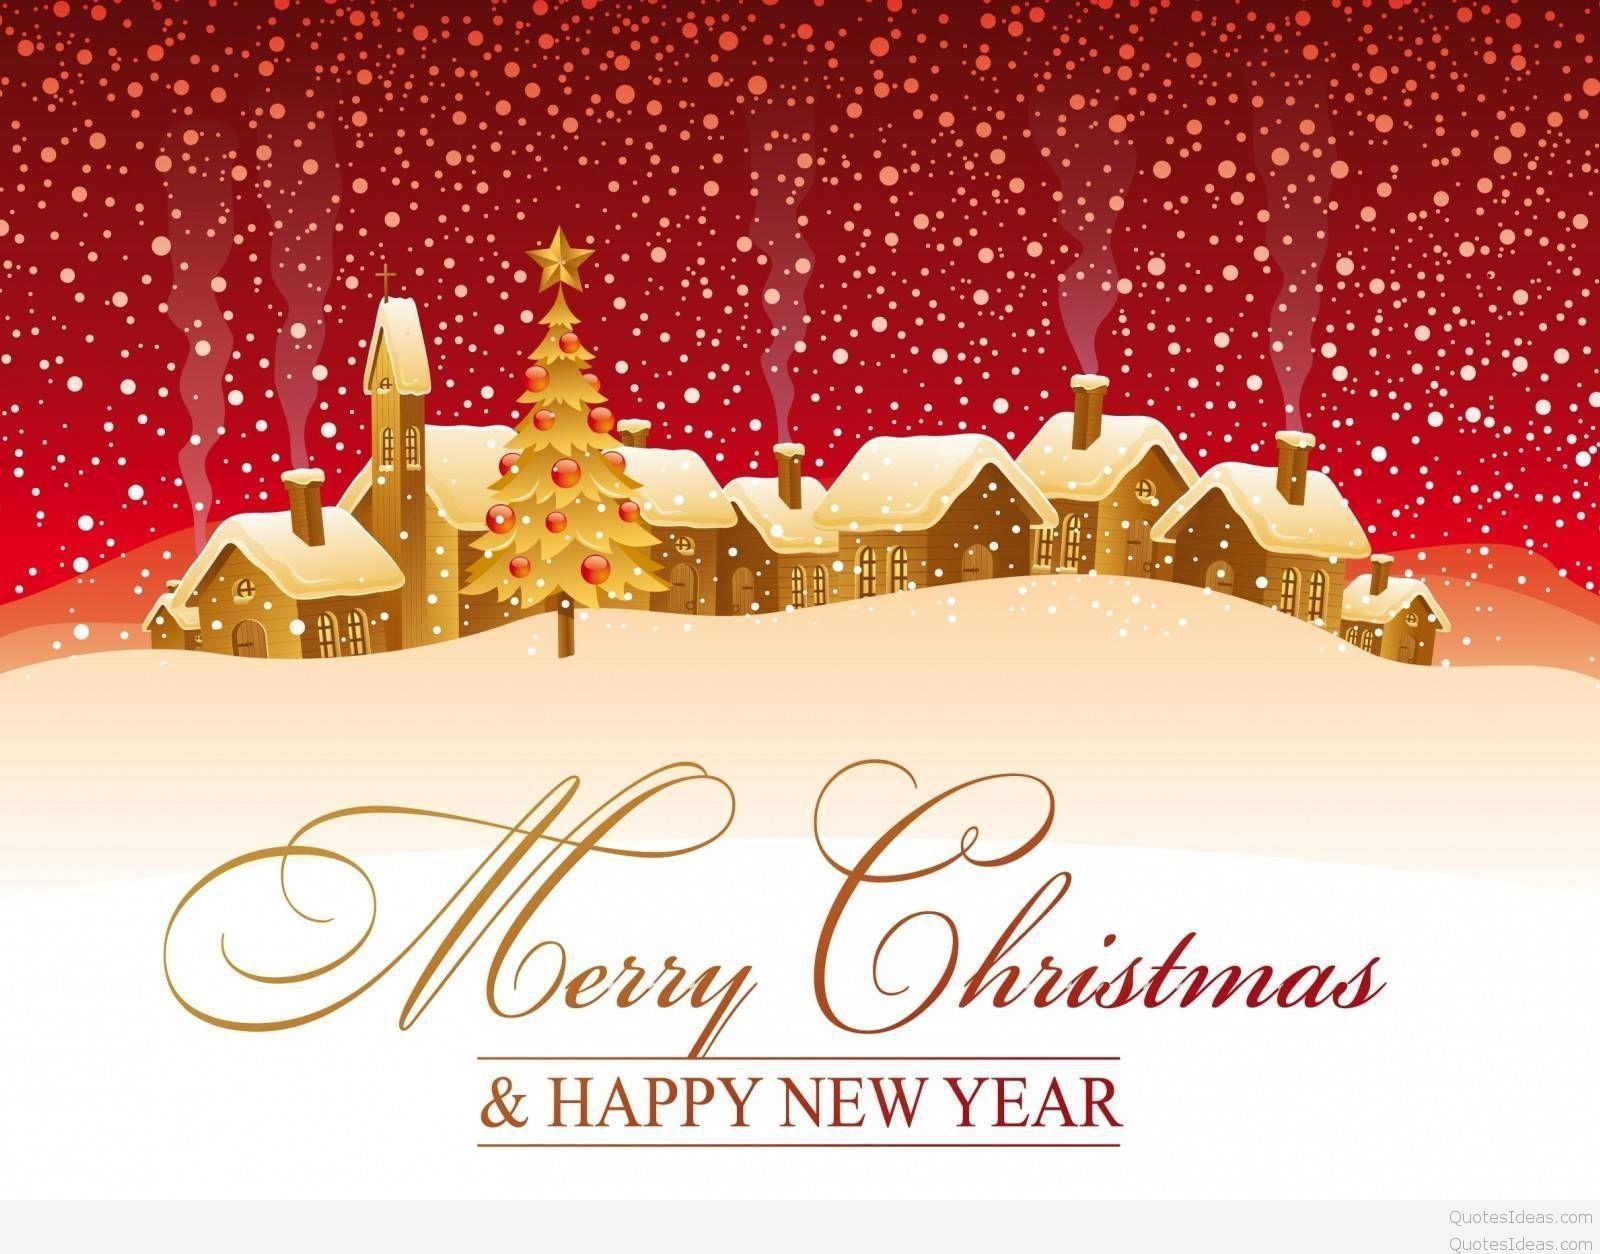 Cute Houses Merry Christmas Wallpaper & Happy new year 2016